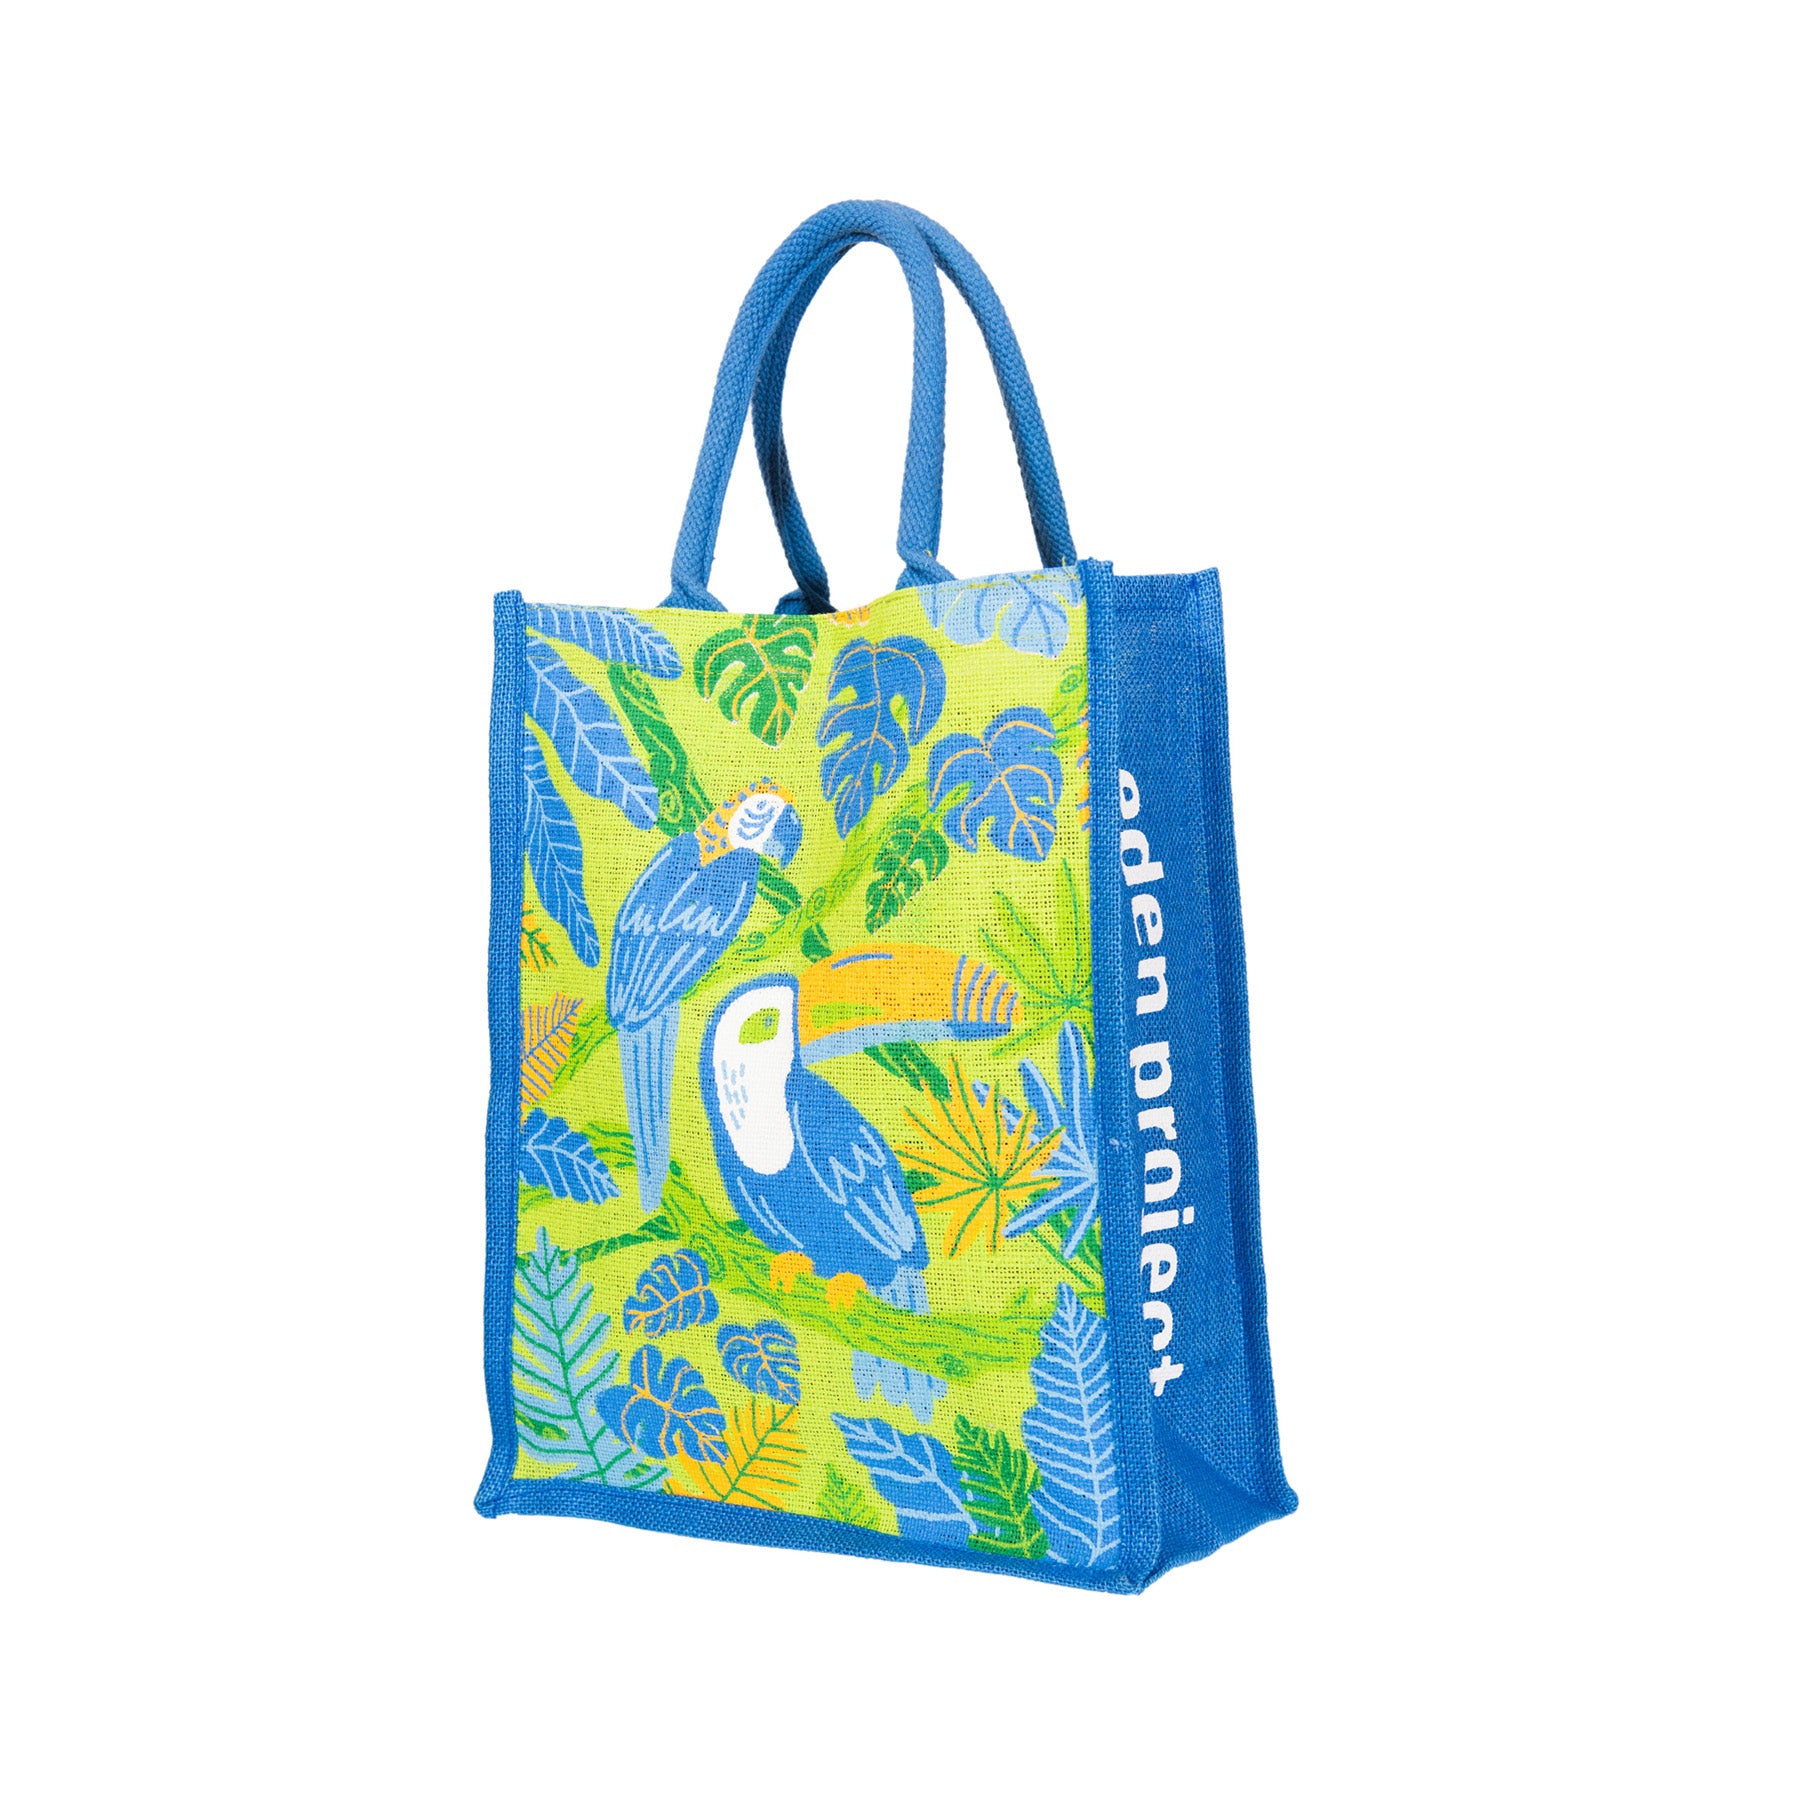 Blue reusable tote bag with tropical bird and foliage print, eco-friendly shopping bag with toucan and palm leaves design, vibrant color fabric tote for groceries and everyday use